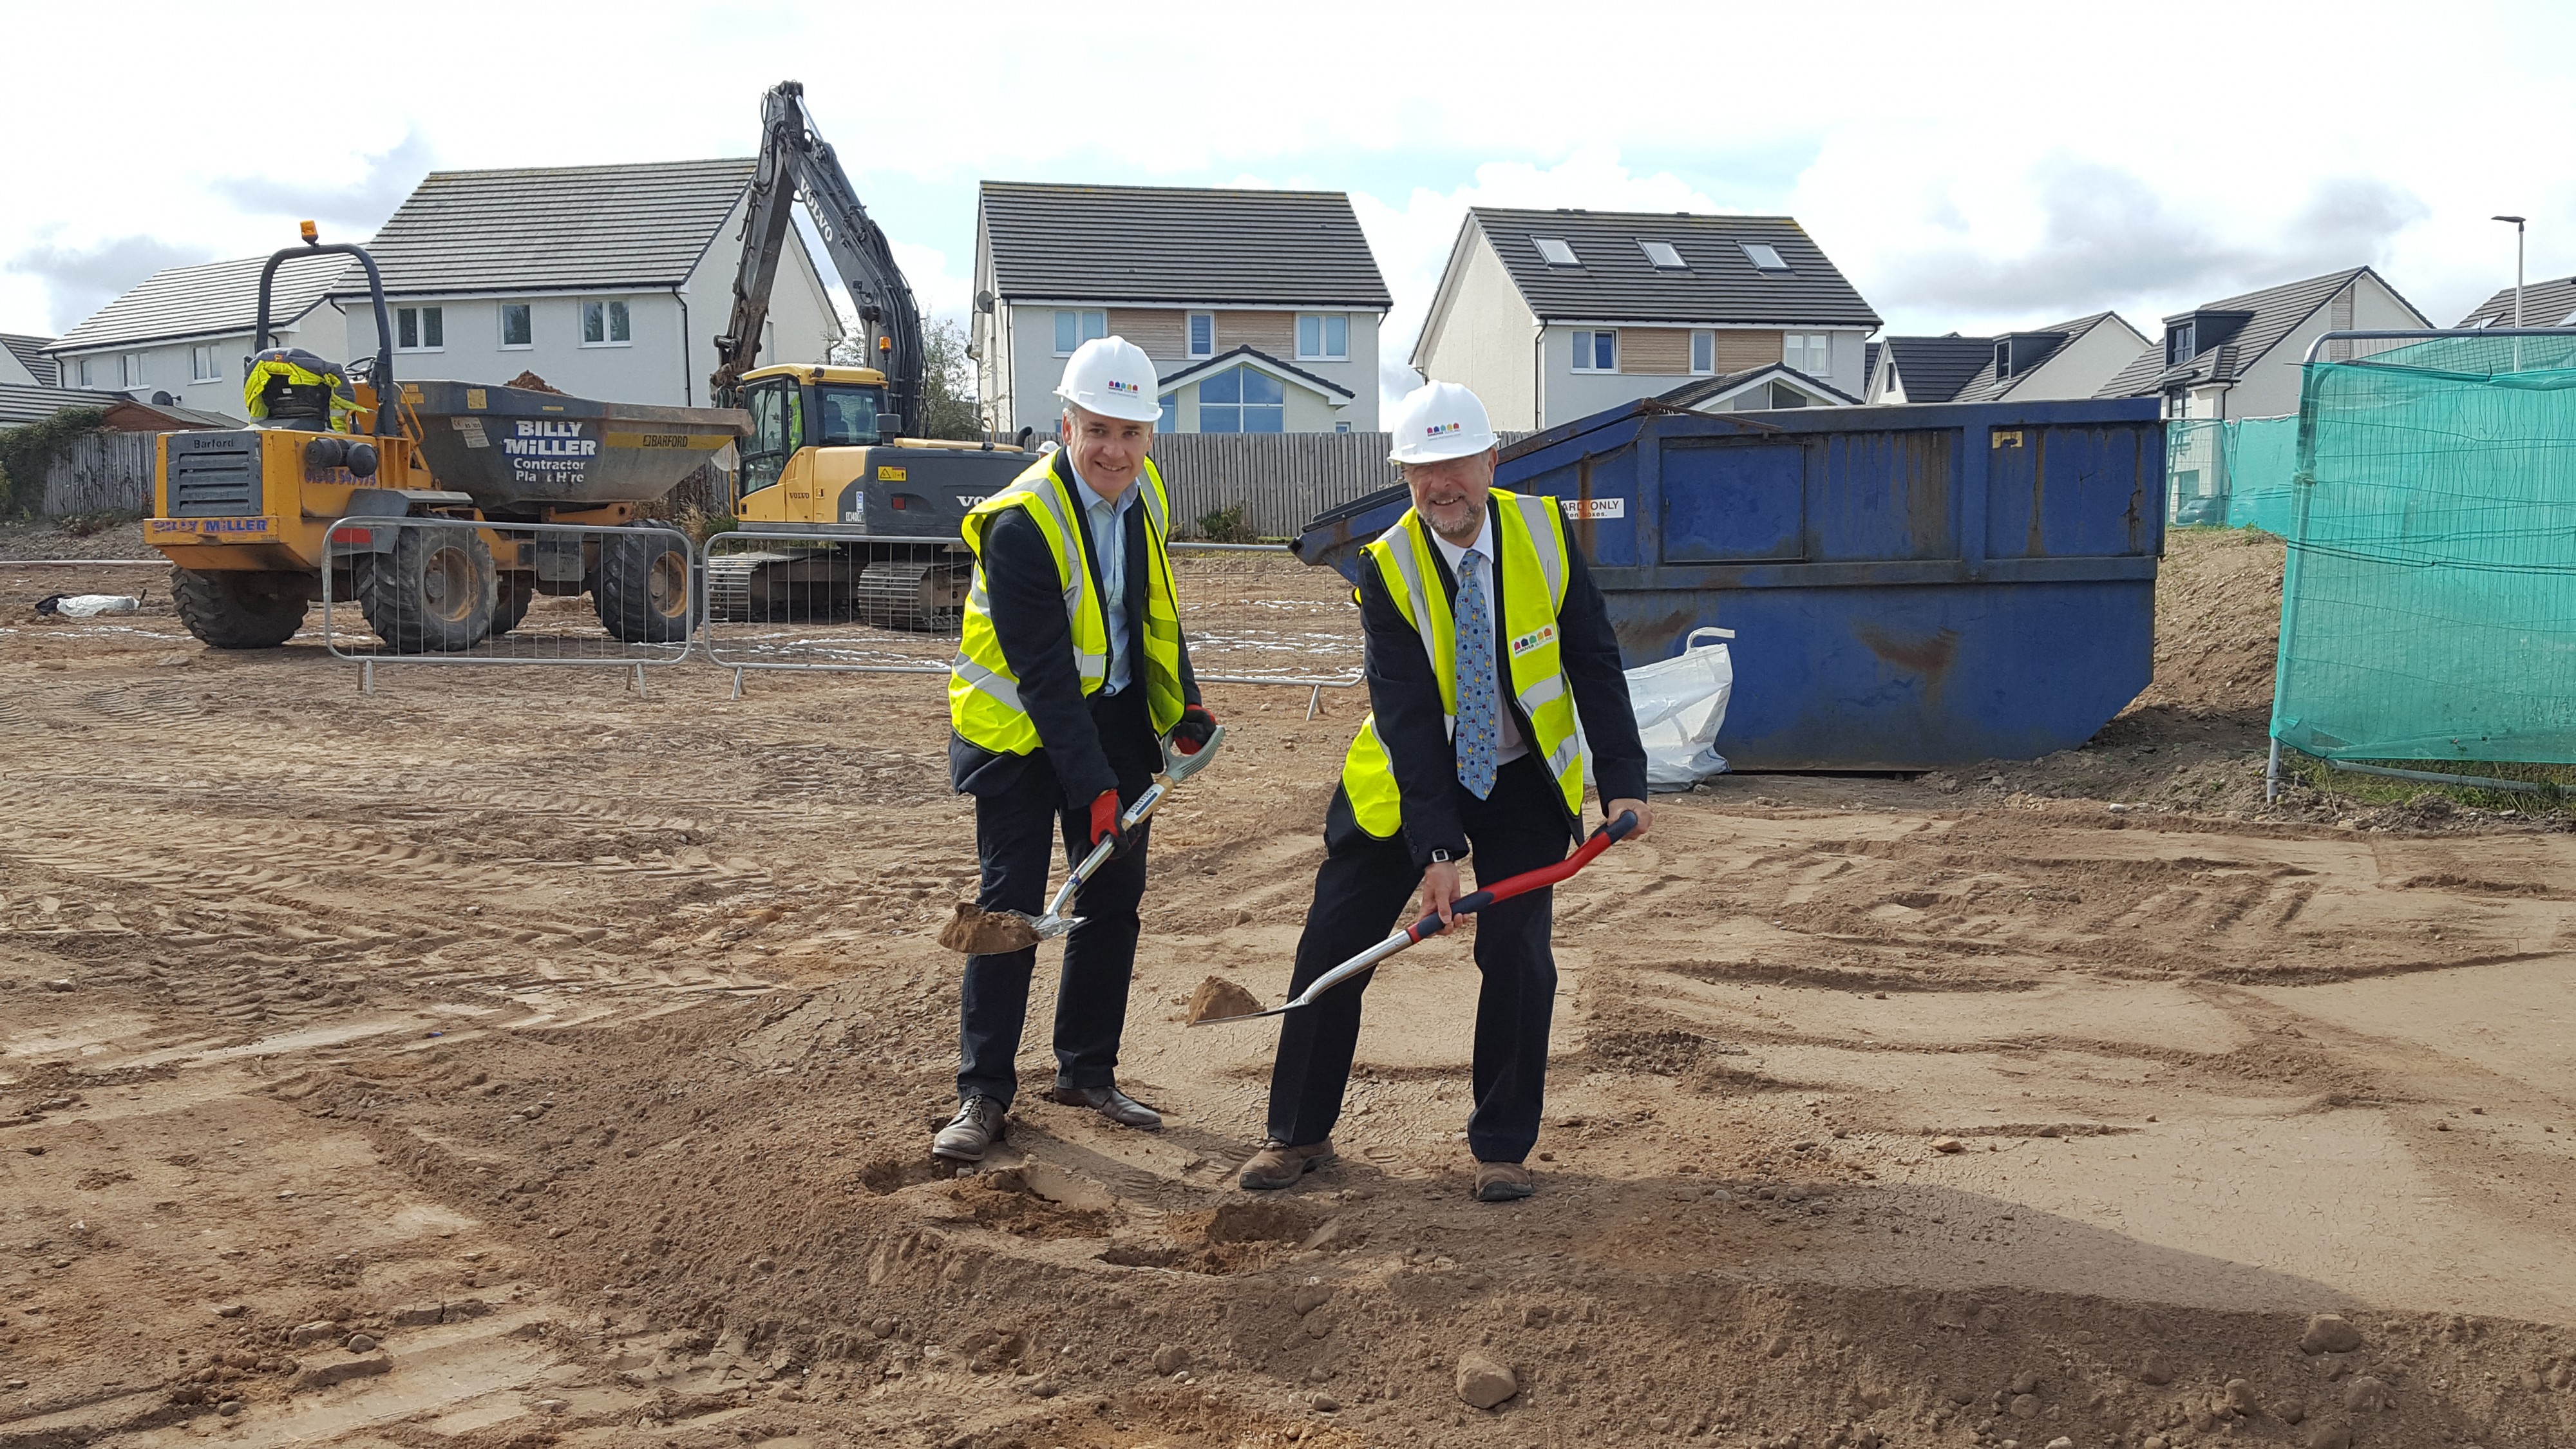 Moray residents asked to name new Hanover development